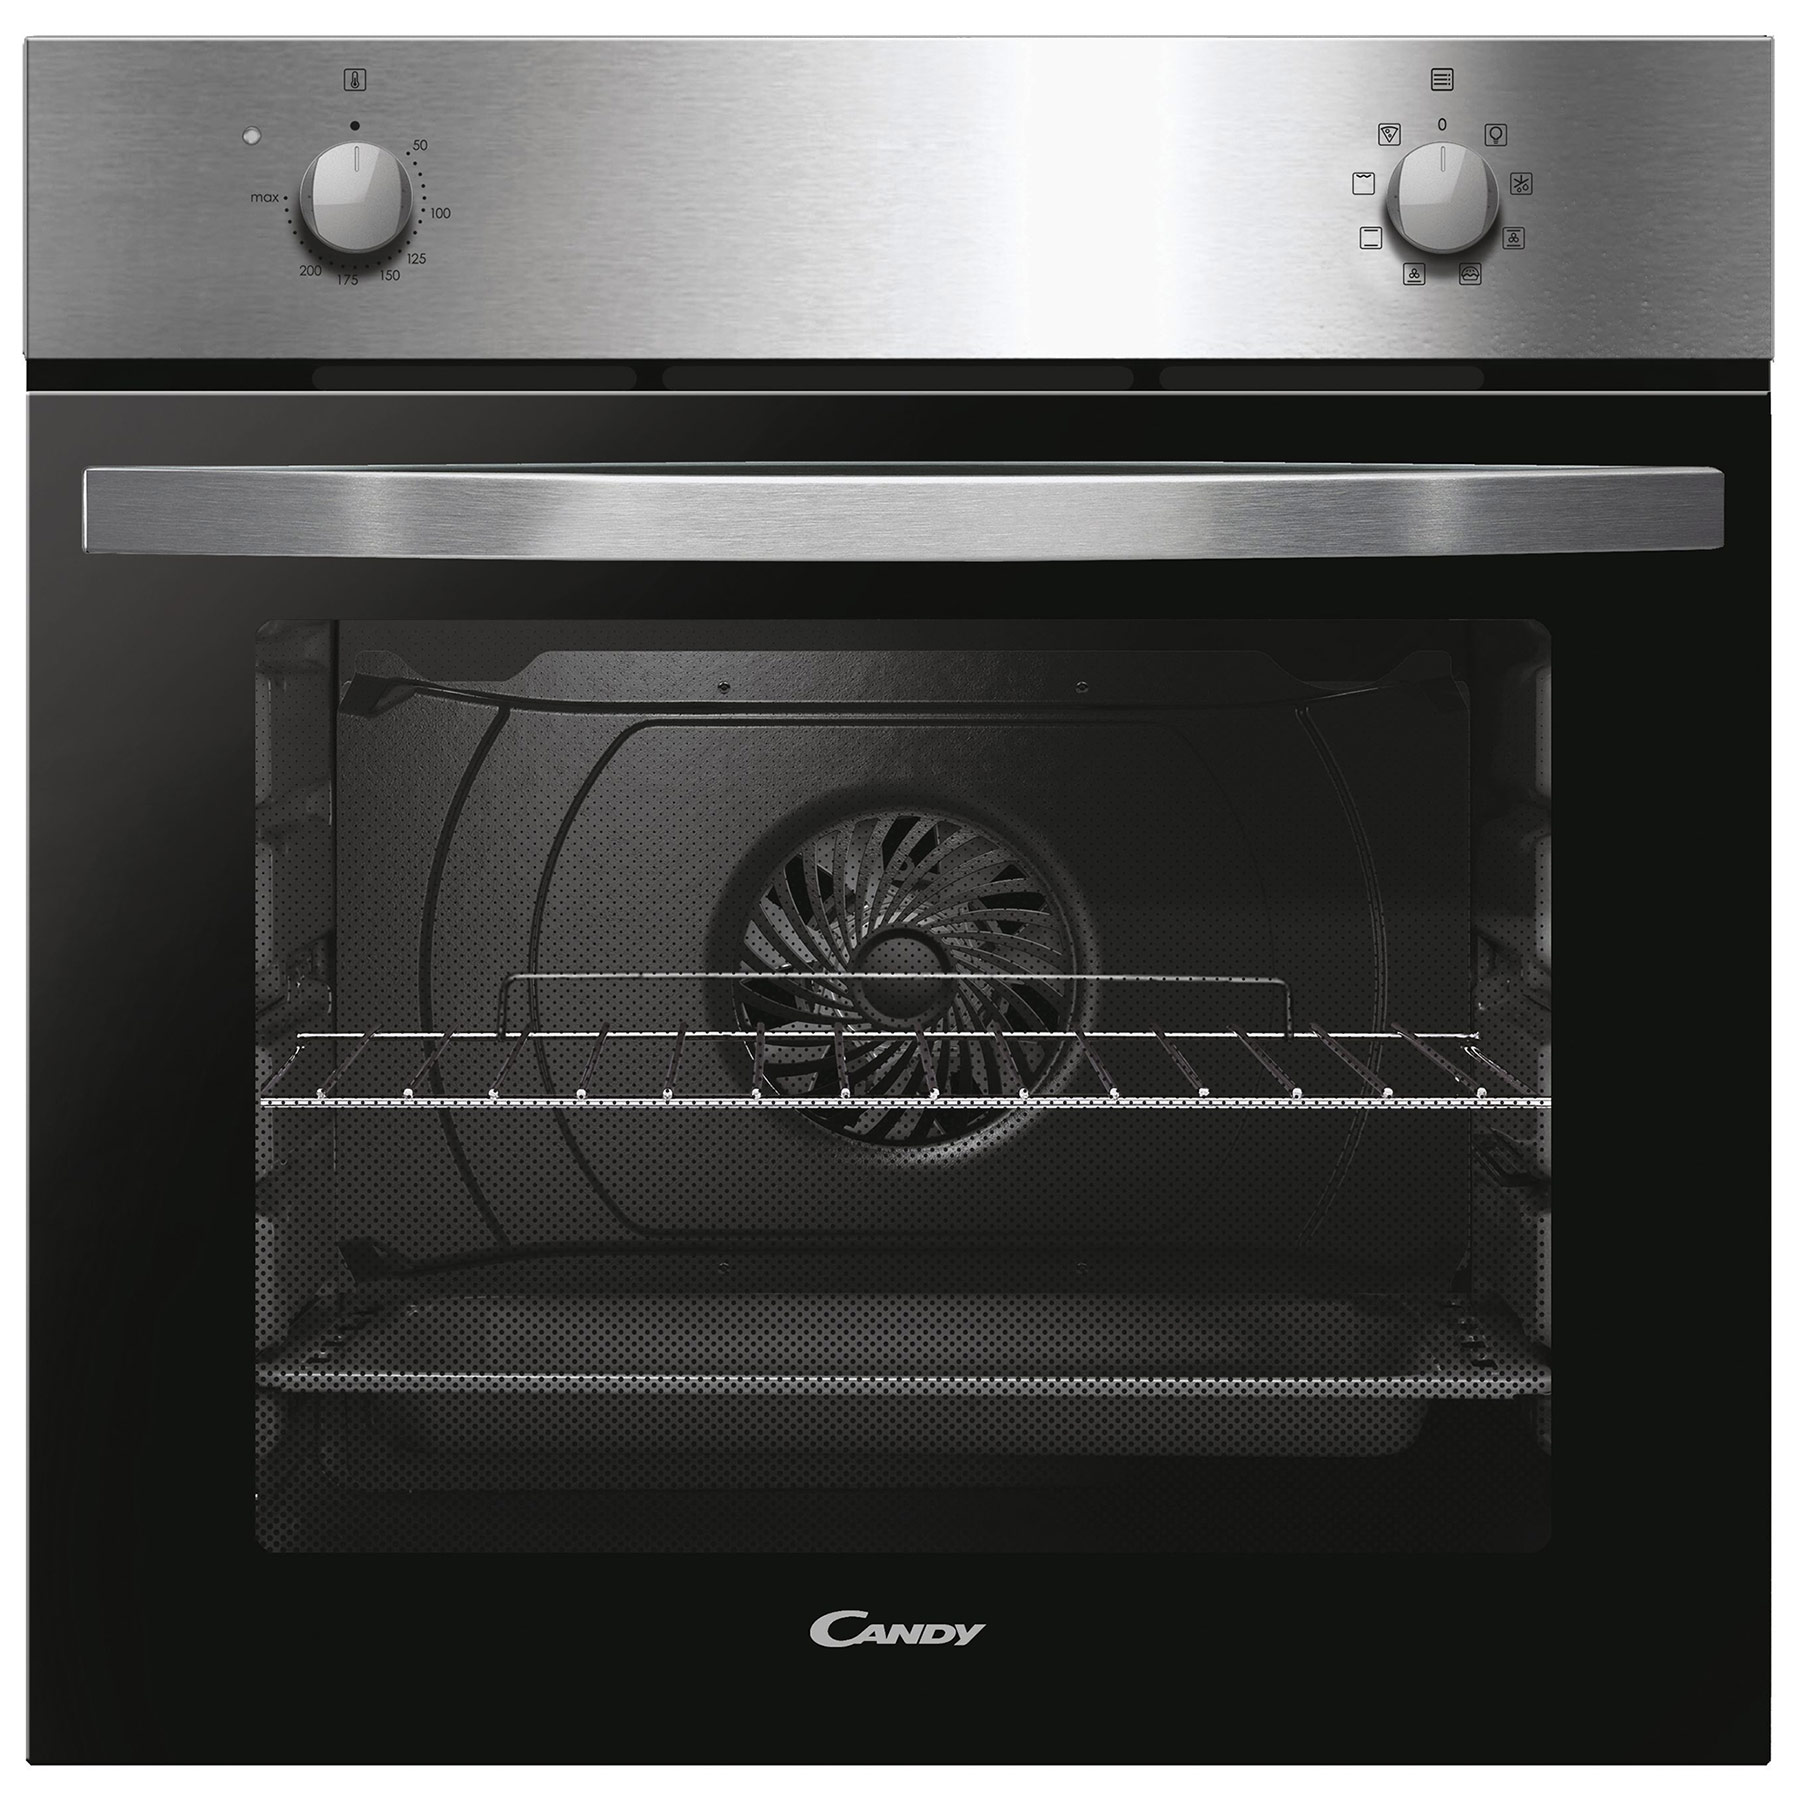 Candy FIDCX600 Built In Electric Single Oven in St Steel 65L A Rated